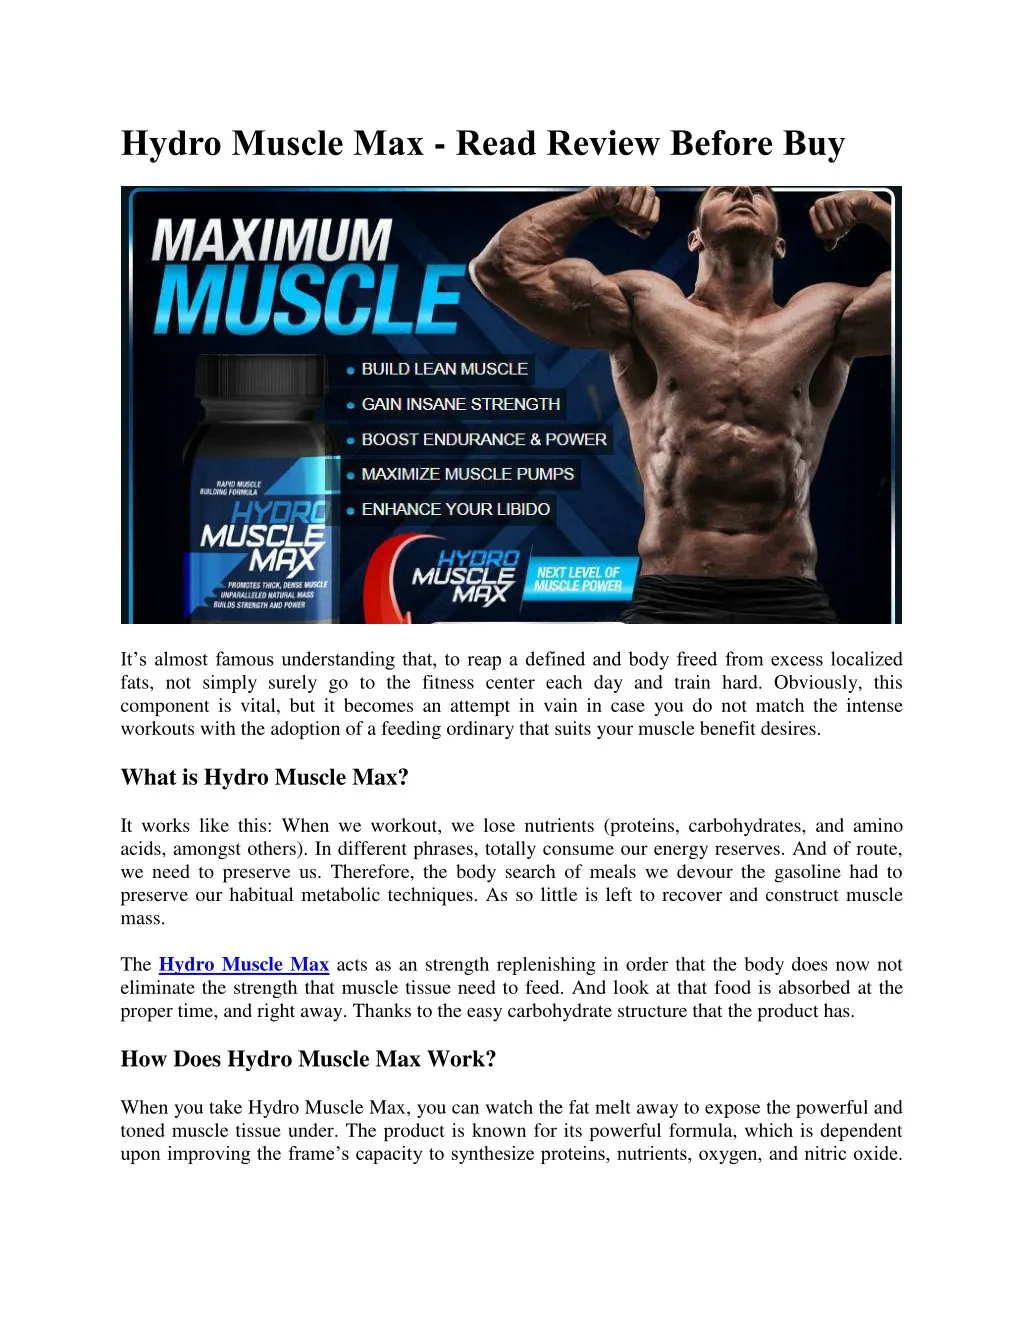 hydro muscle max read review before buy